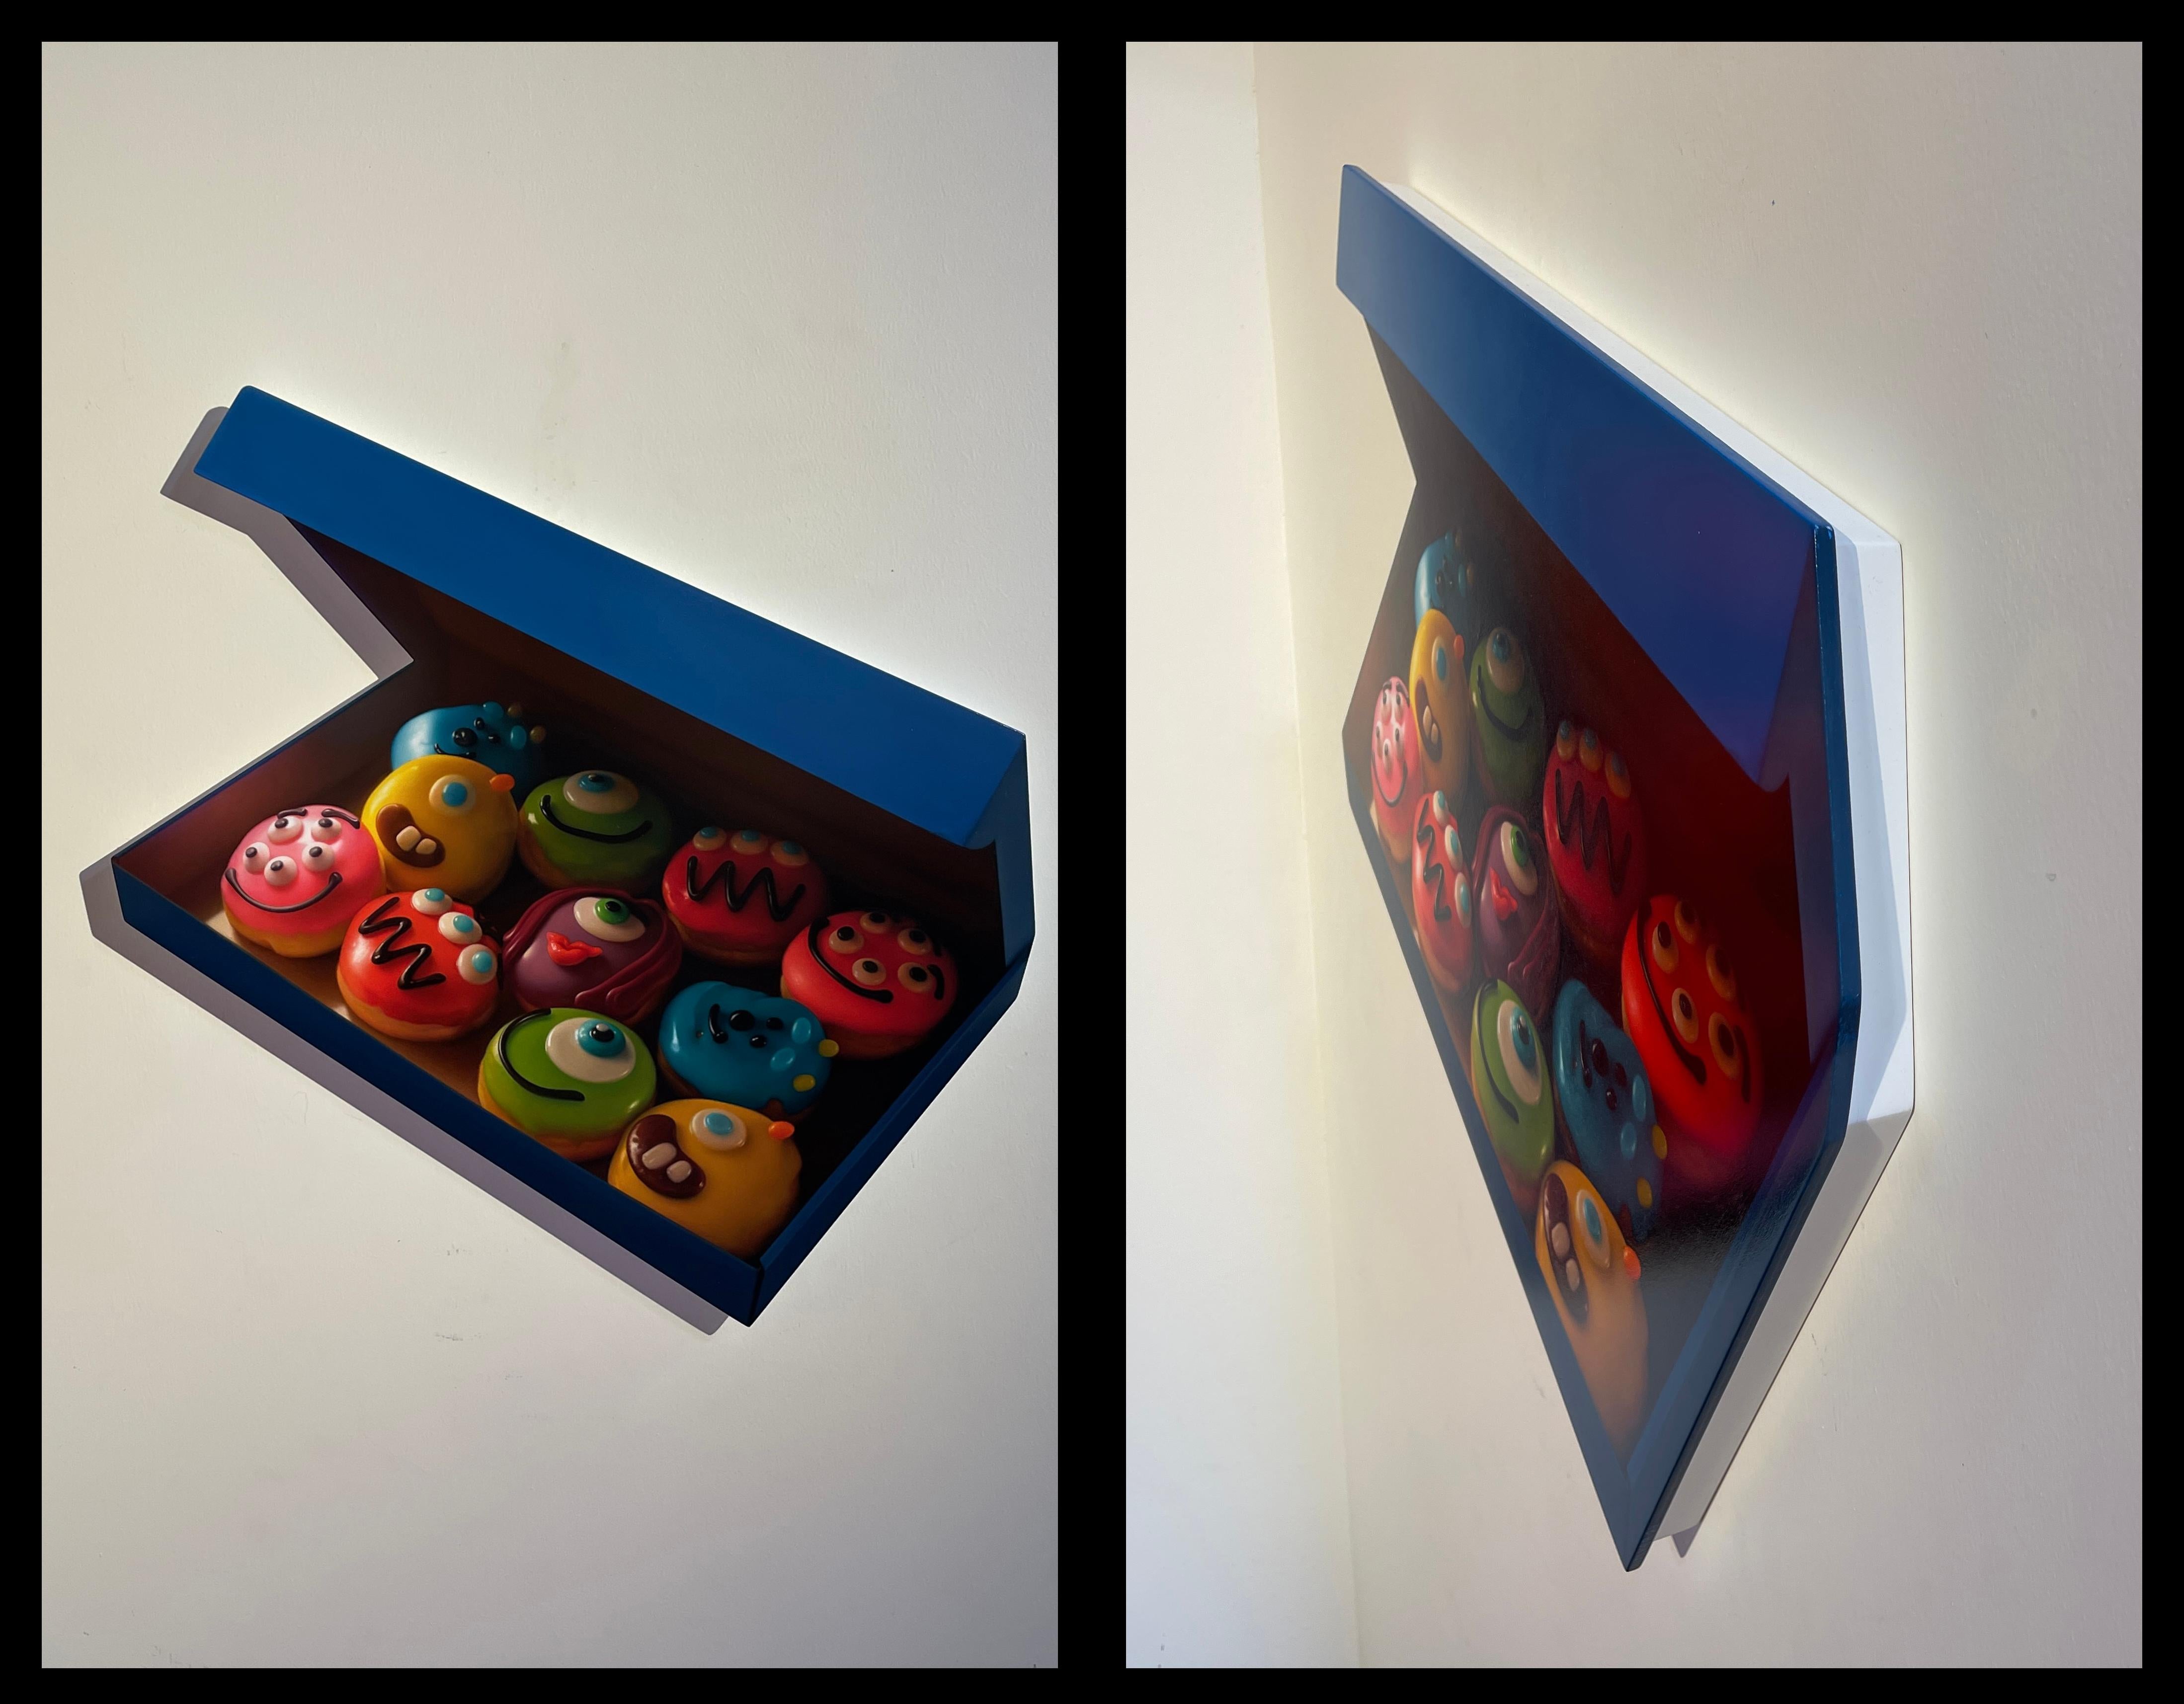 Jason Walker's 'Monsters', a 2023 original oil painting on panel, creates the illusion of a floating box of donuts from afar and when viewed head-on. This 16 x 23.50-inch artwork, priced at $13,000.00, is designed to be hung unframed. Its